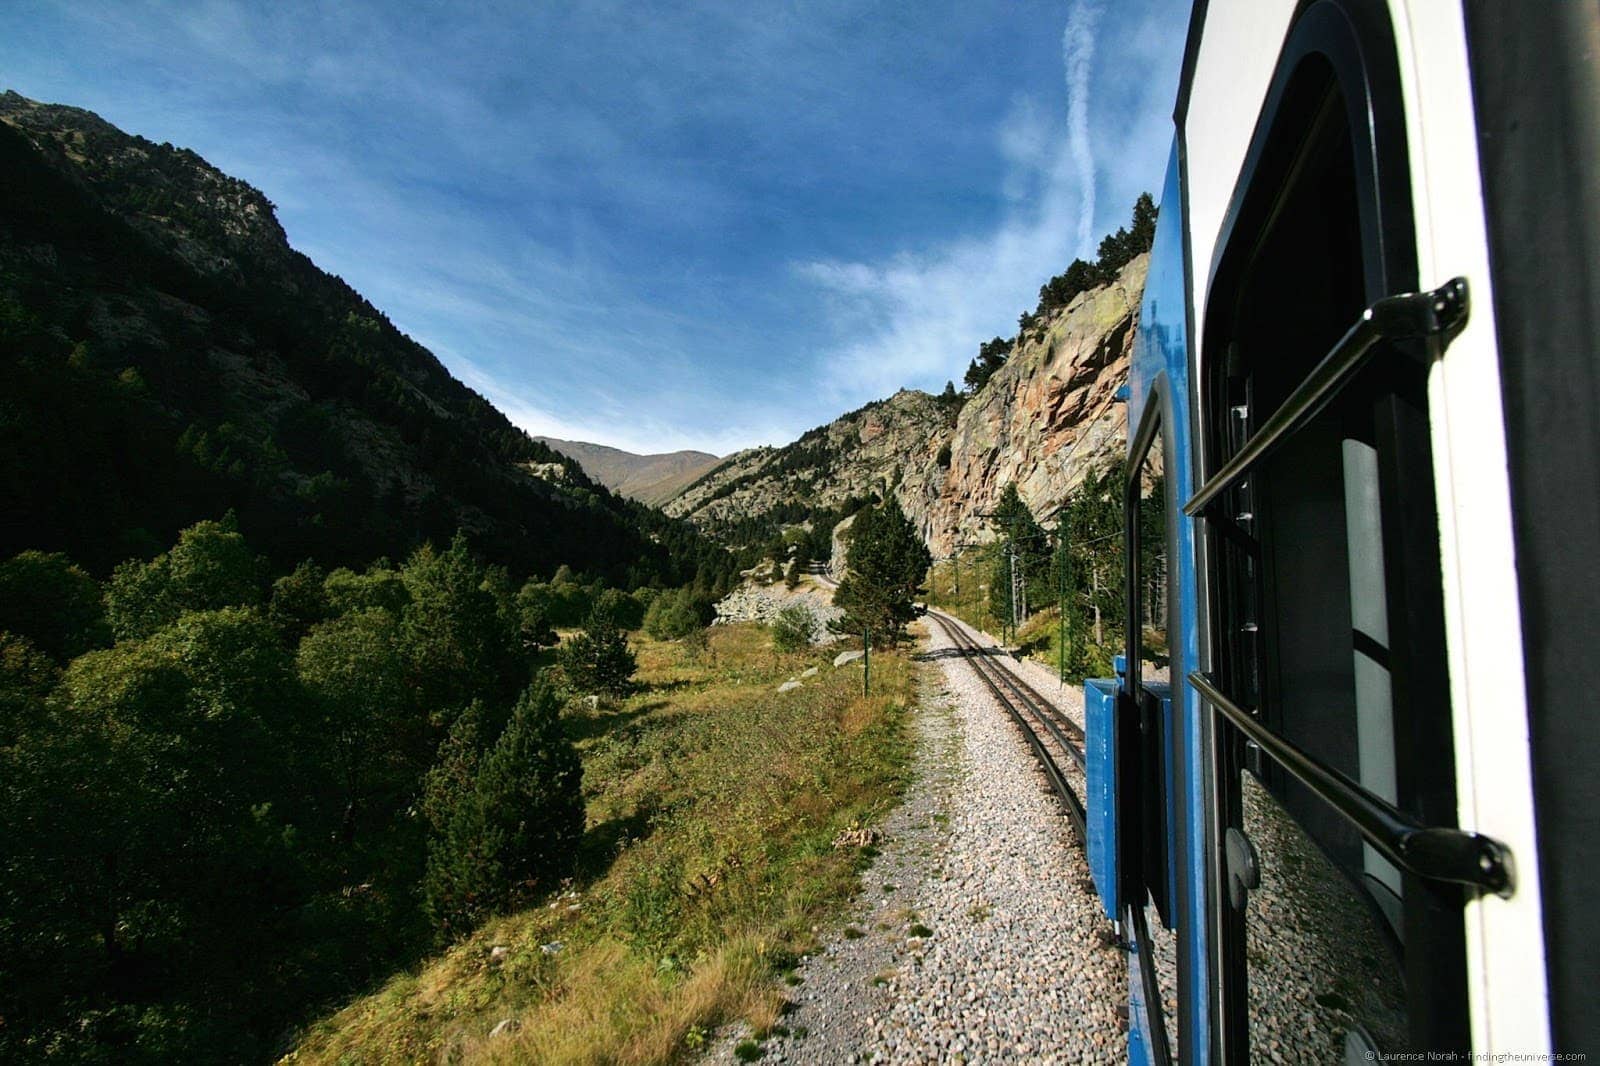 Train ride to the Nuria Valley